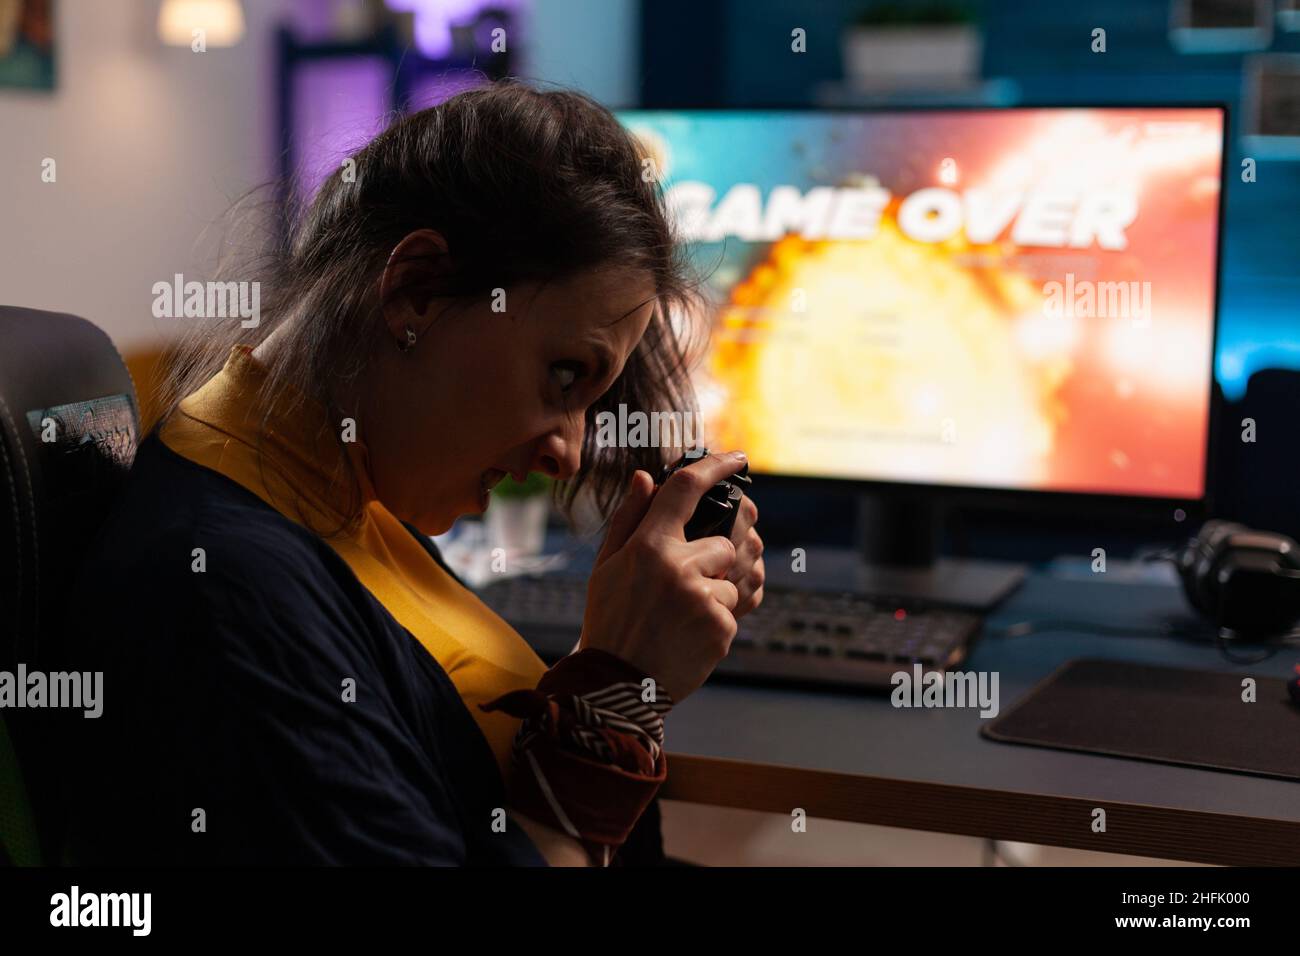 Frustrated gamer playing online video games with controller. Woman using joystick on computer to play internet games and losing. Disappointed person with electronic gaming equipment. Stock Photo